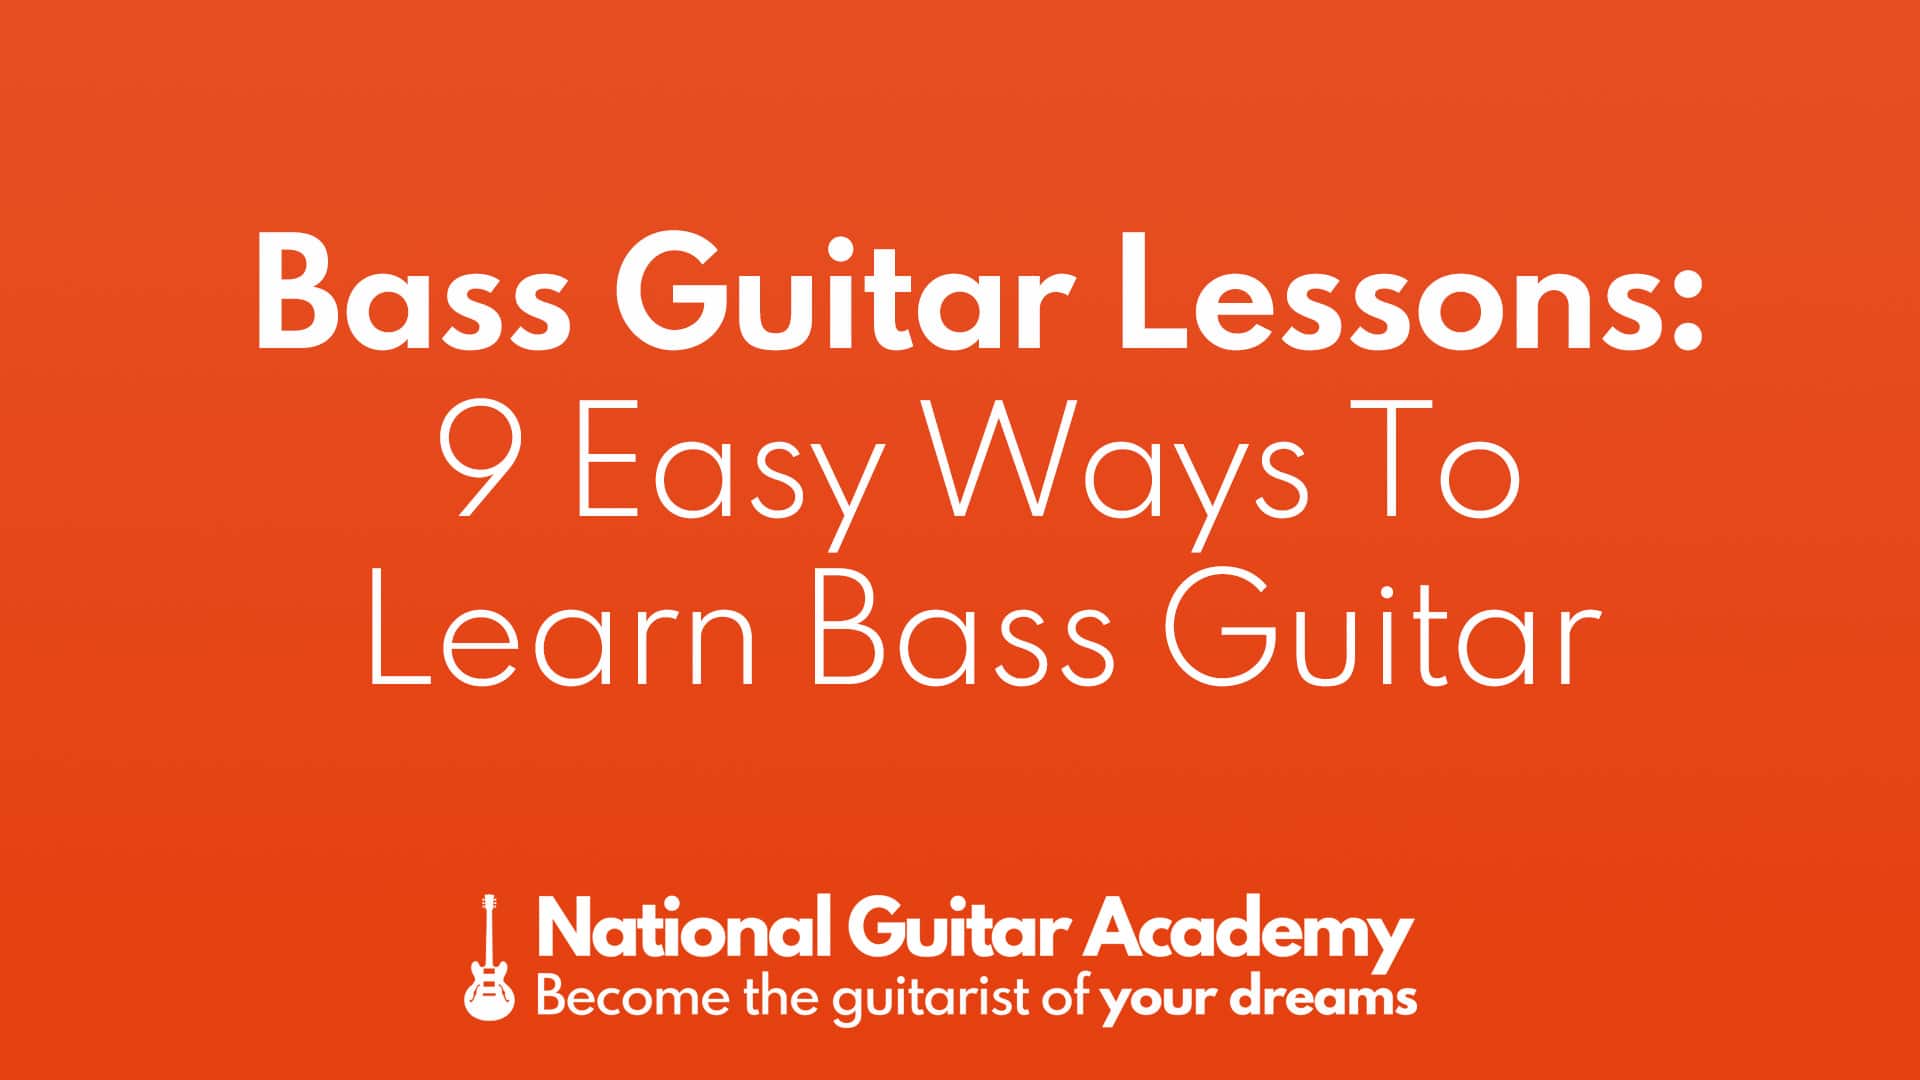 Bass Guitar Lessons 9 Easy Ways To Learn Bass Guitar National Guitar Academy